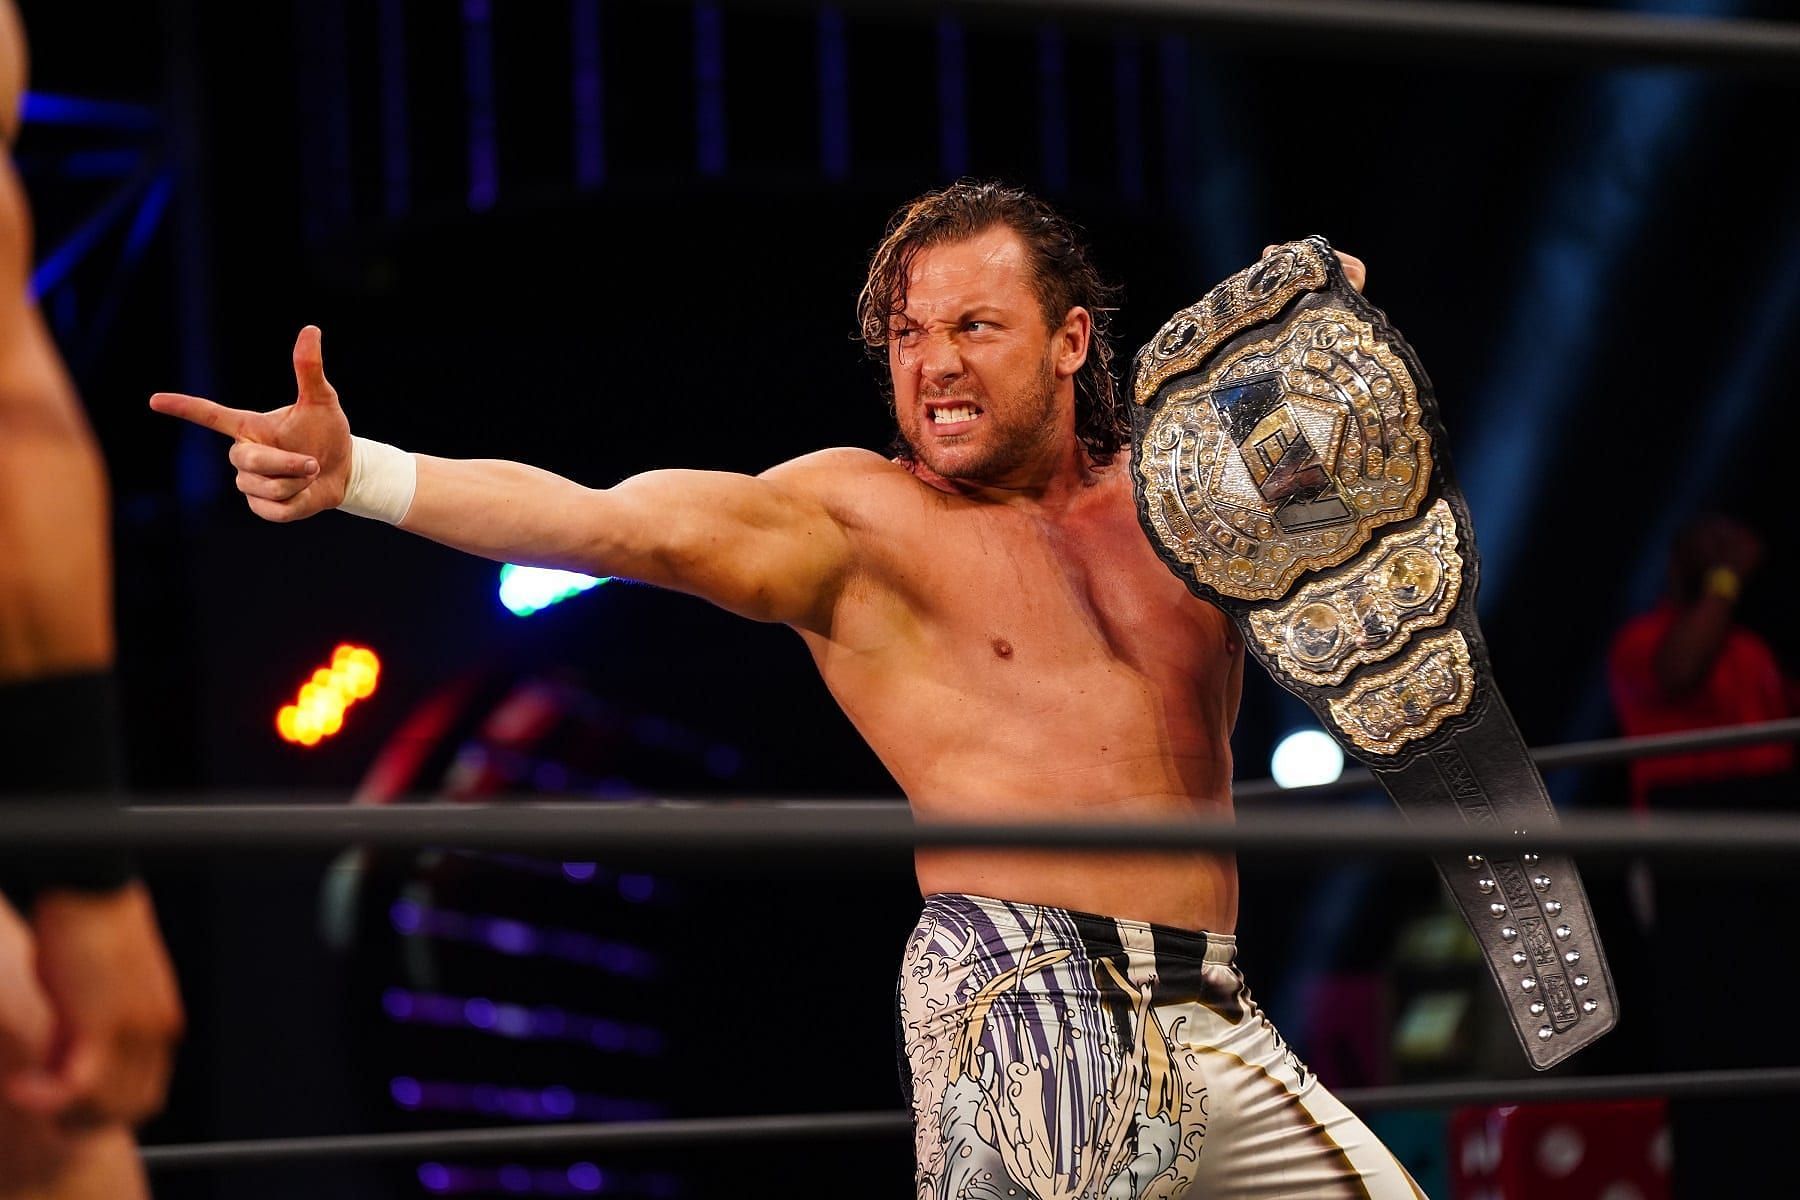 Kenny Omega is one of the top stars in the industry.